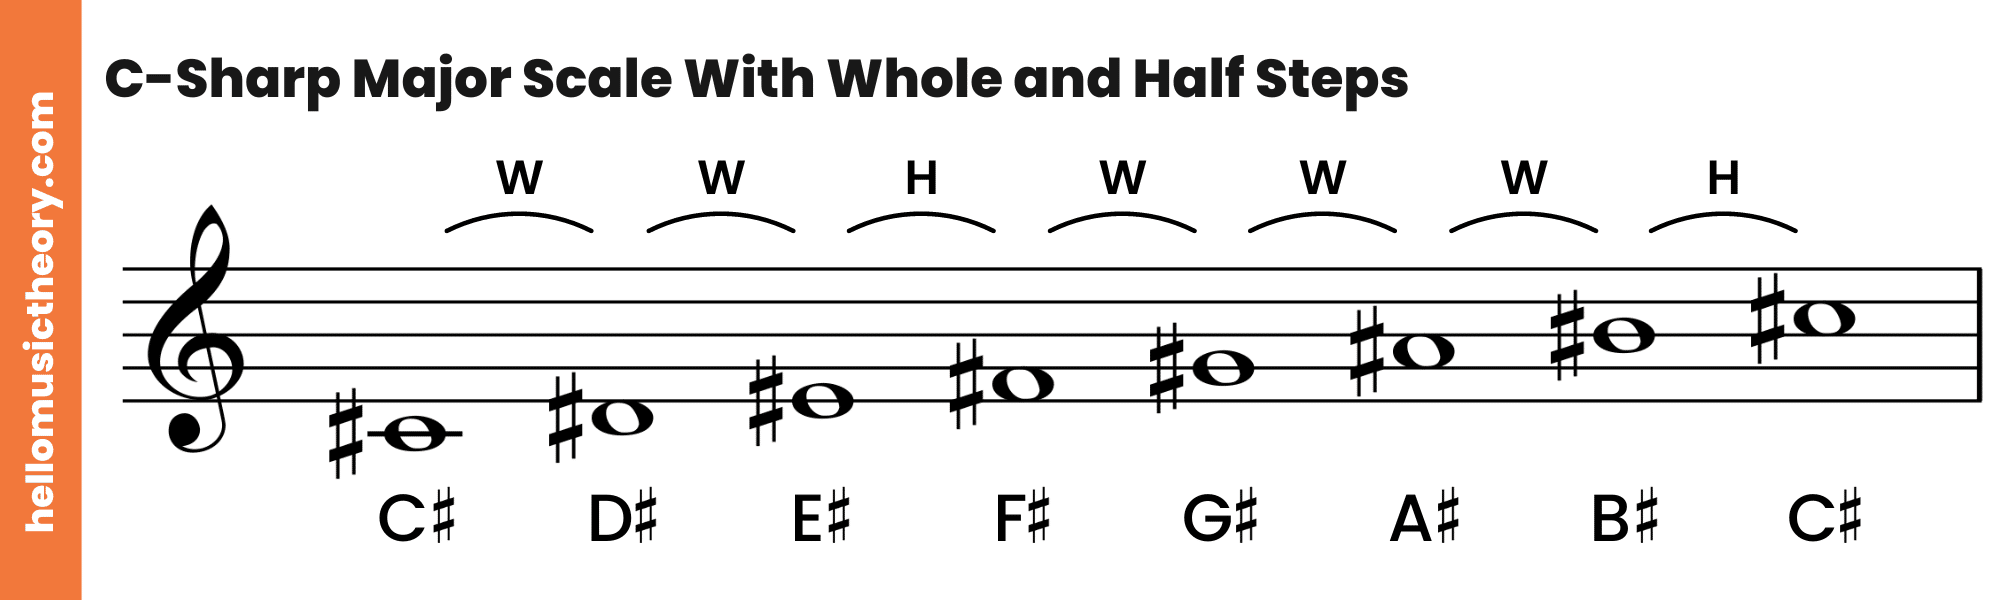 C-Sharp Major Scale Treble Clef With Whole and Half Steps